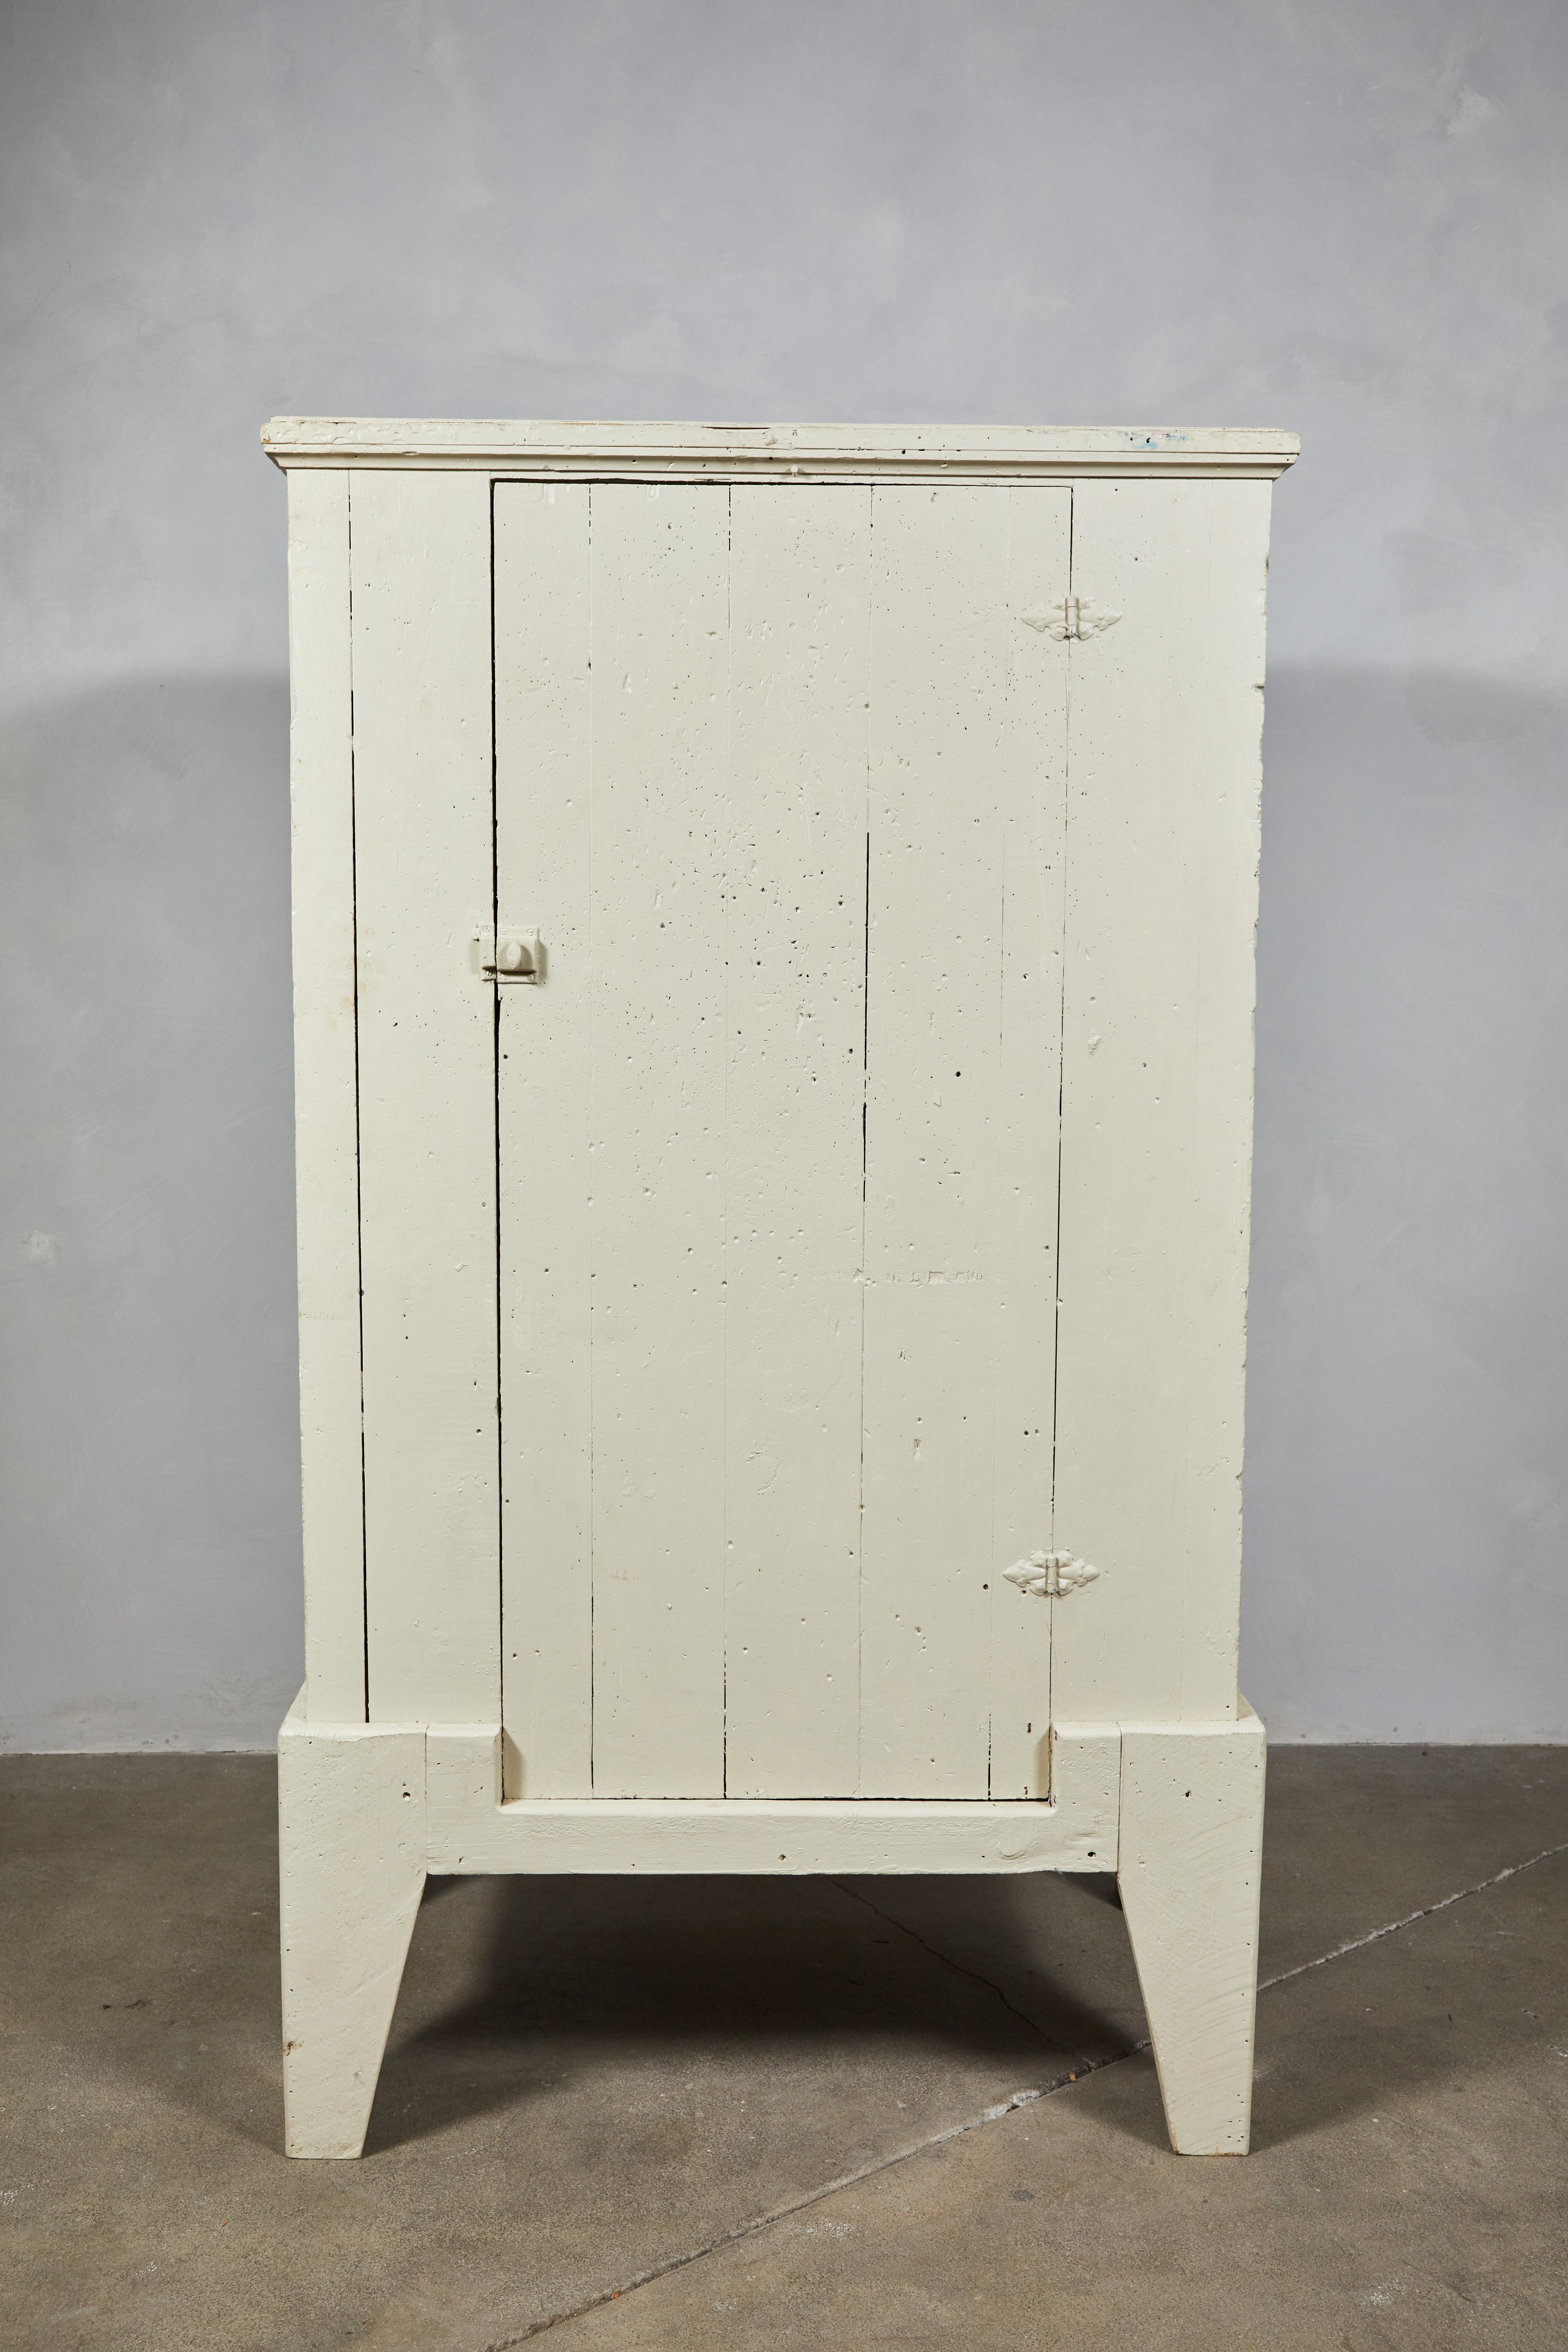 Early American white painted single door cabinet with chunky legs. Inside offers two shelves.